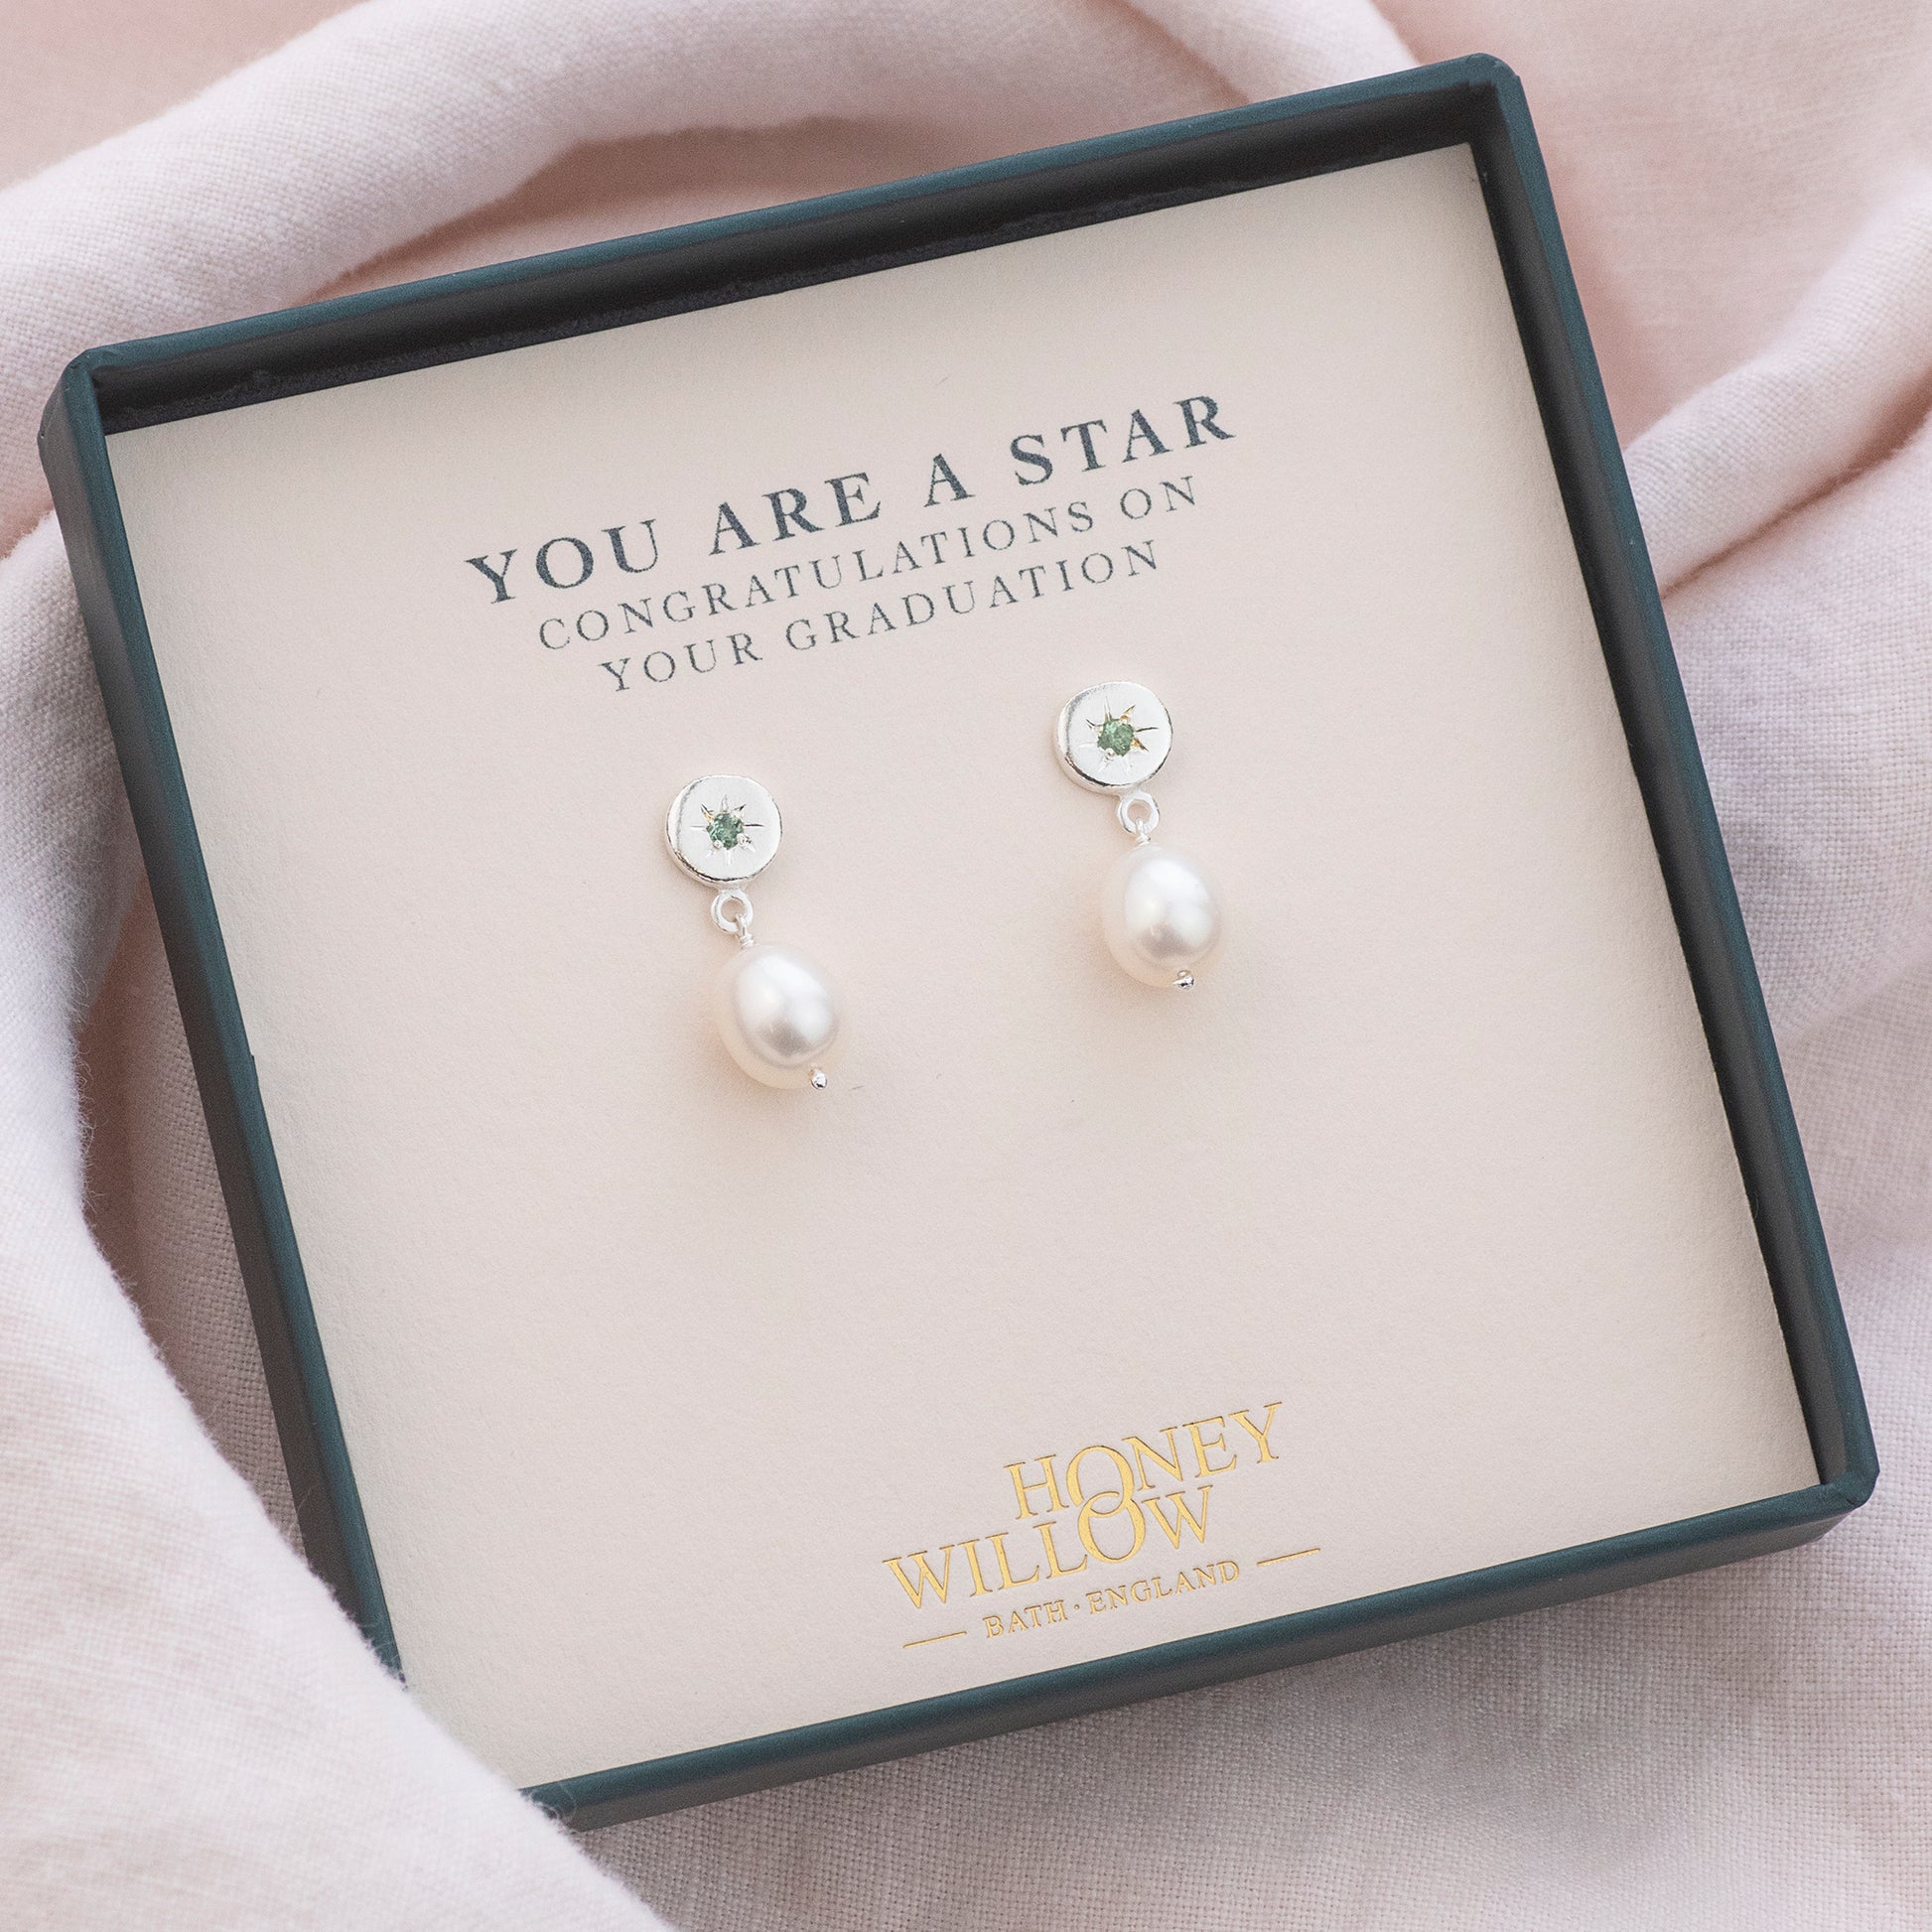 Graduation Gift - Star Set Birthstone Earrings with Pearls - Silver